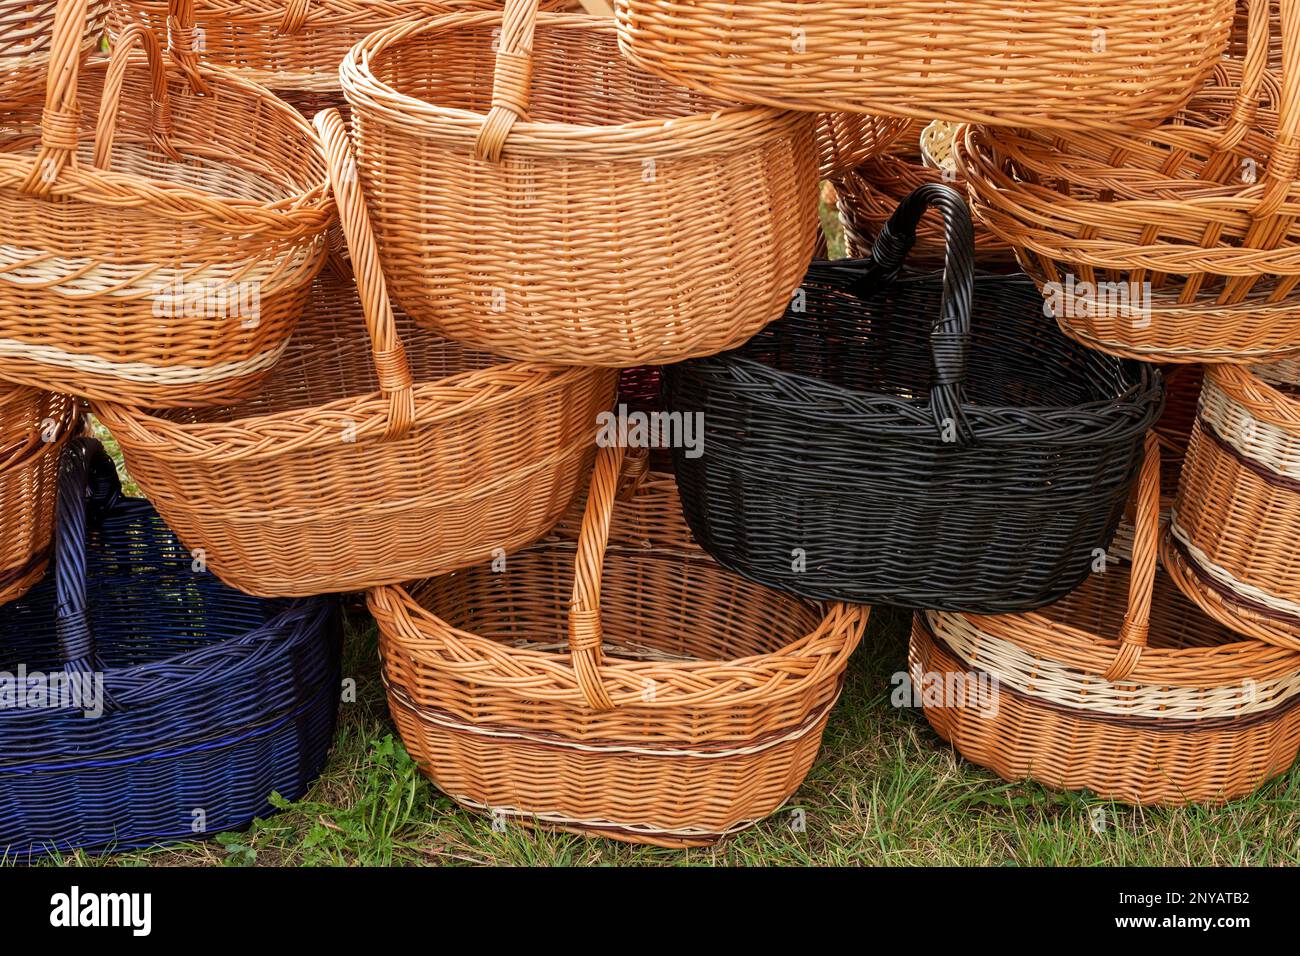 Handmade wicker baskets. Traditional woven containers made by hand from a natural material. Stock Photo